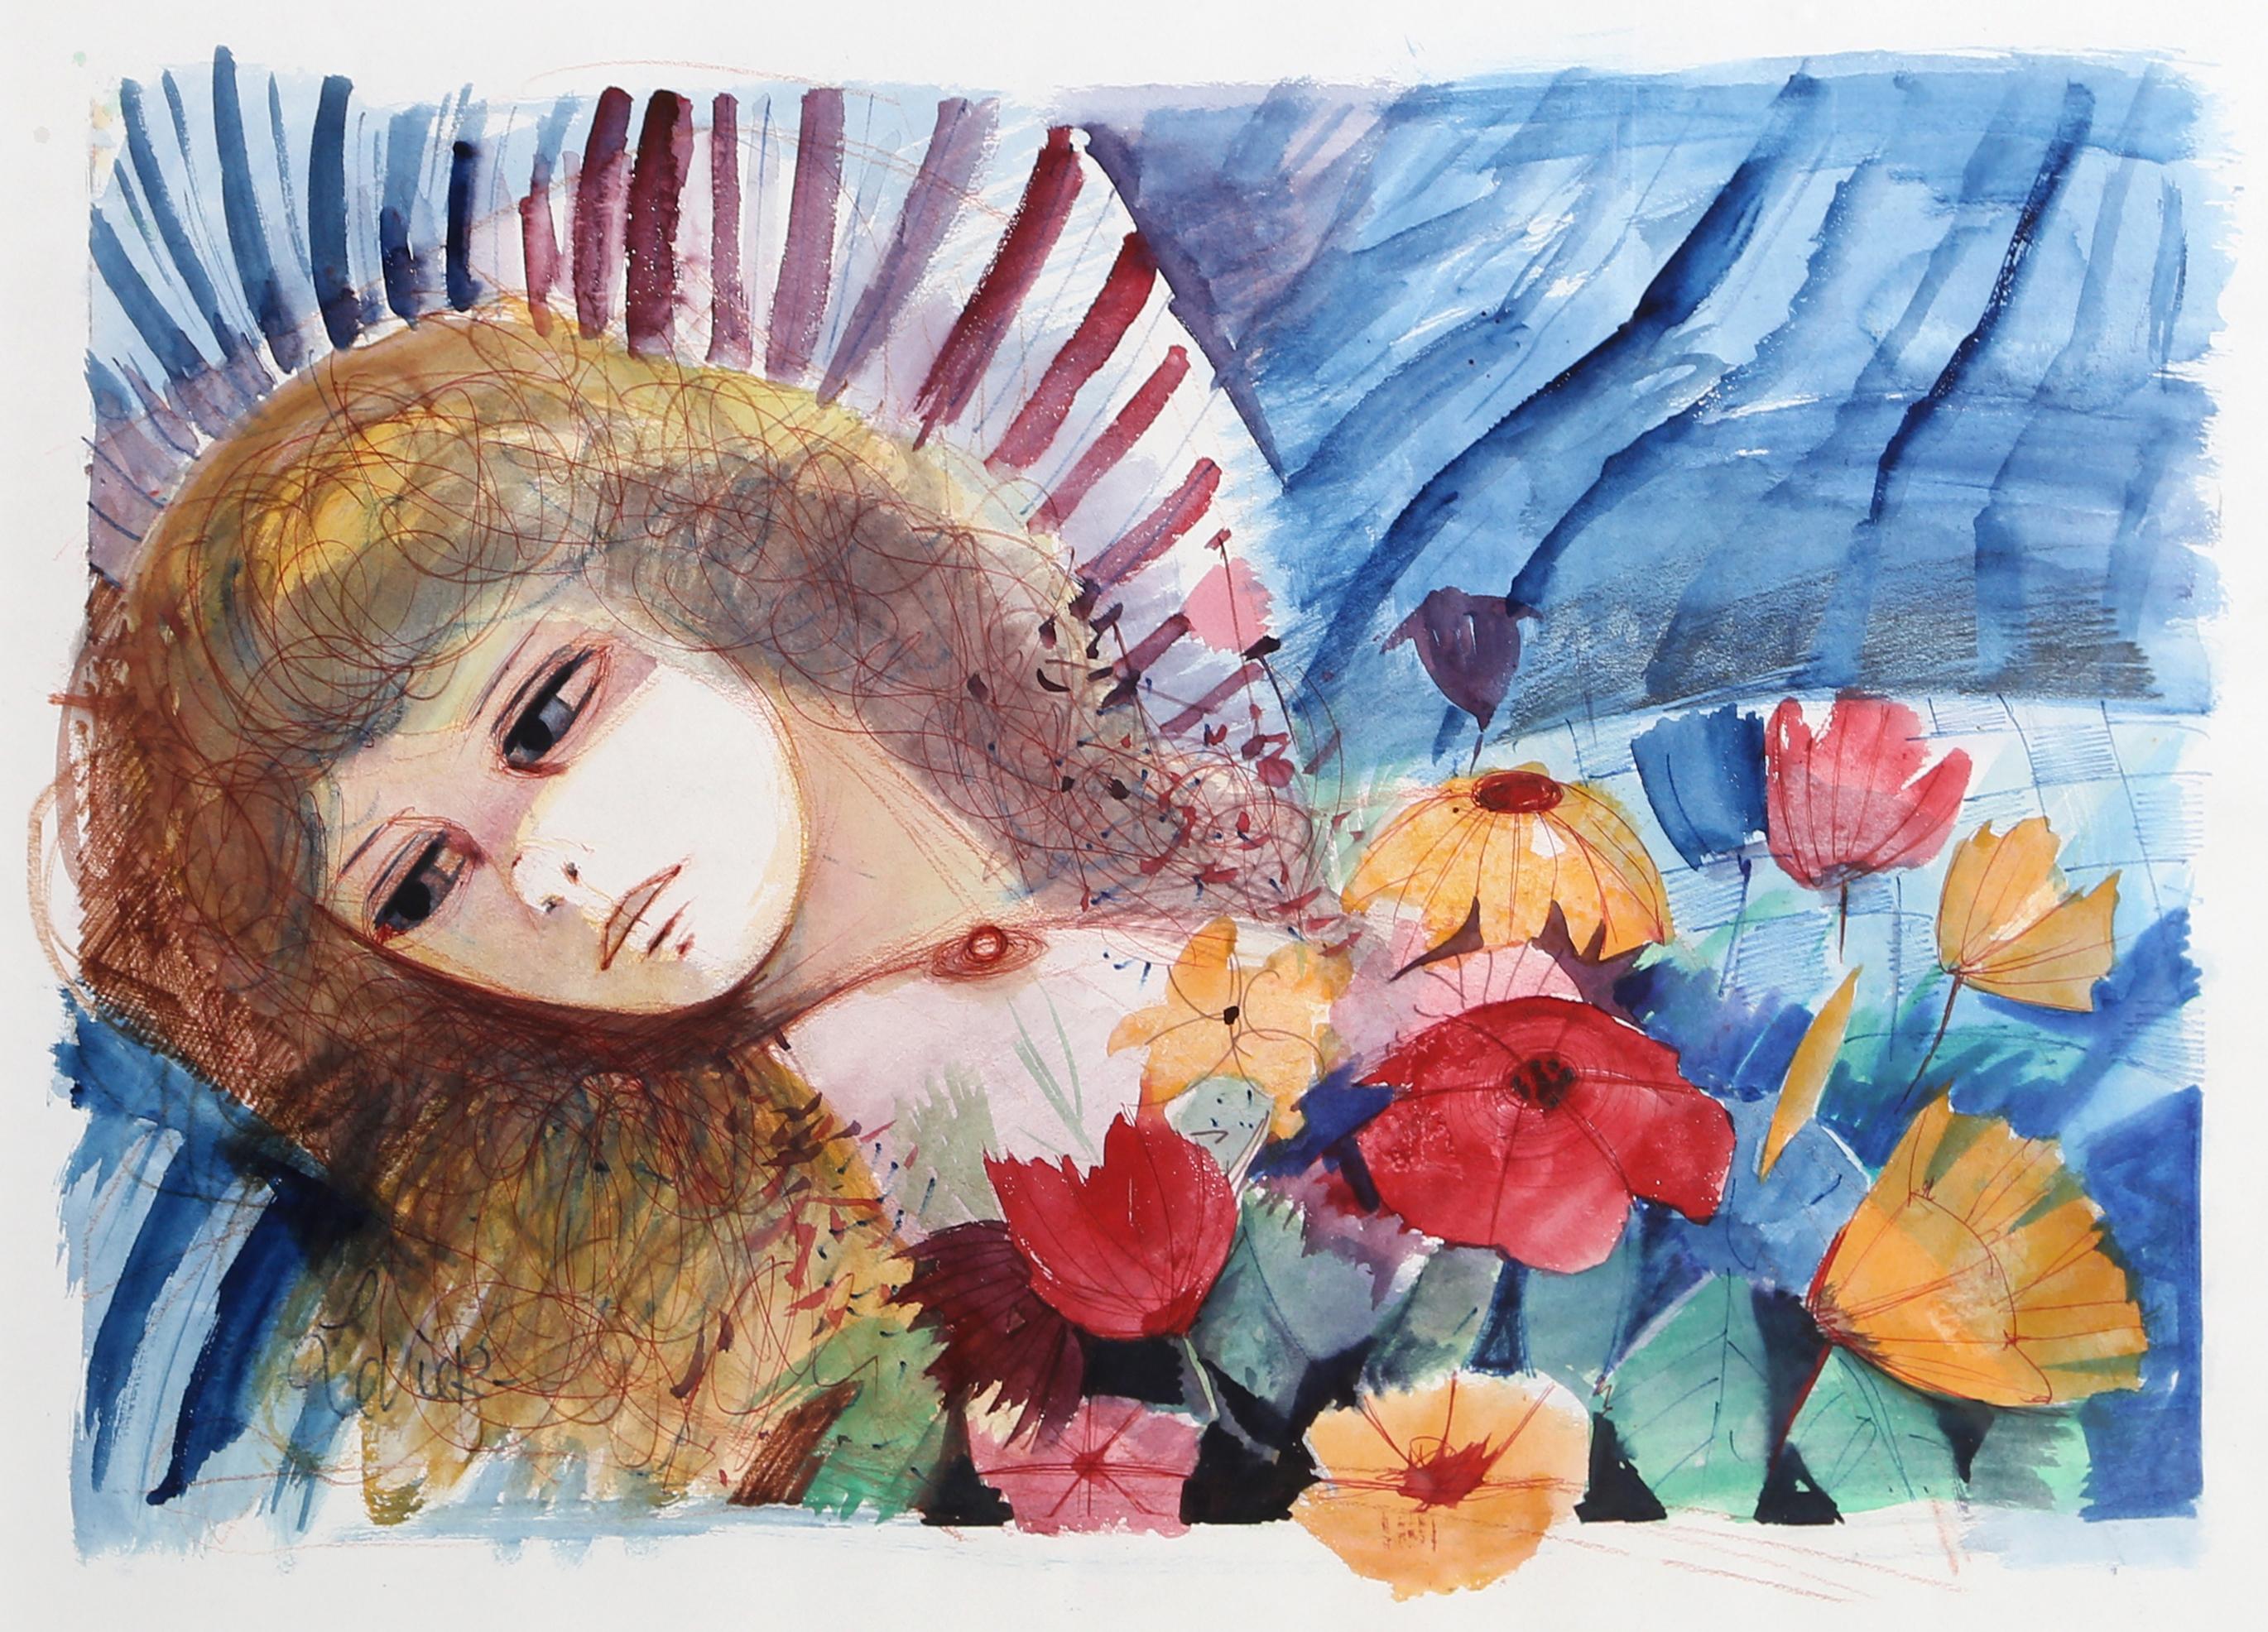 Artist: Charles Levier, French (1920 - 2003)
Title: Reclining Woman and Flowers
Year: circa 1970
Medium: Watercolor on Paper, signed
Image Size: 14 x 21 inches
Frame Size: 25.5 x 31 inches